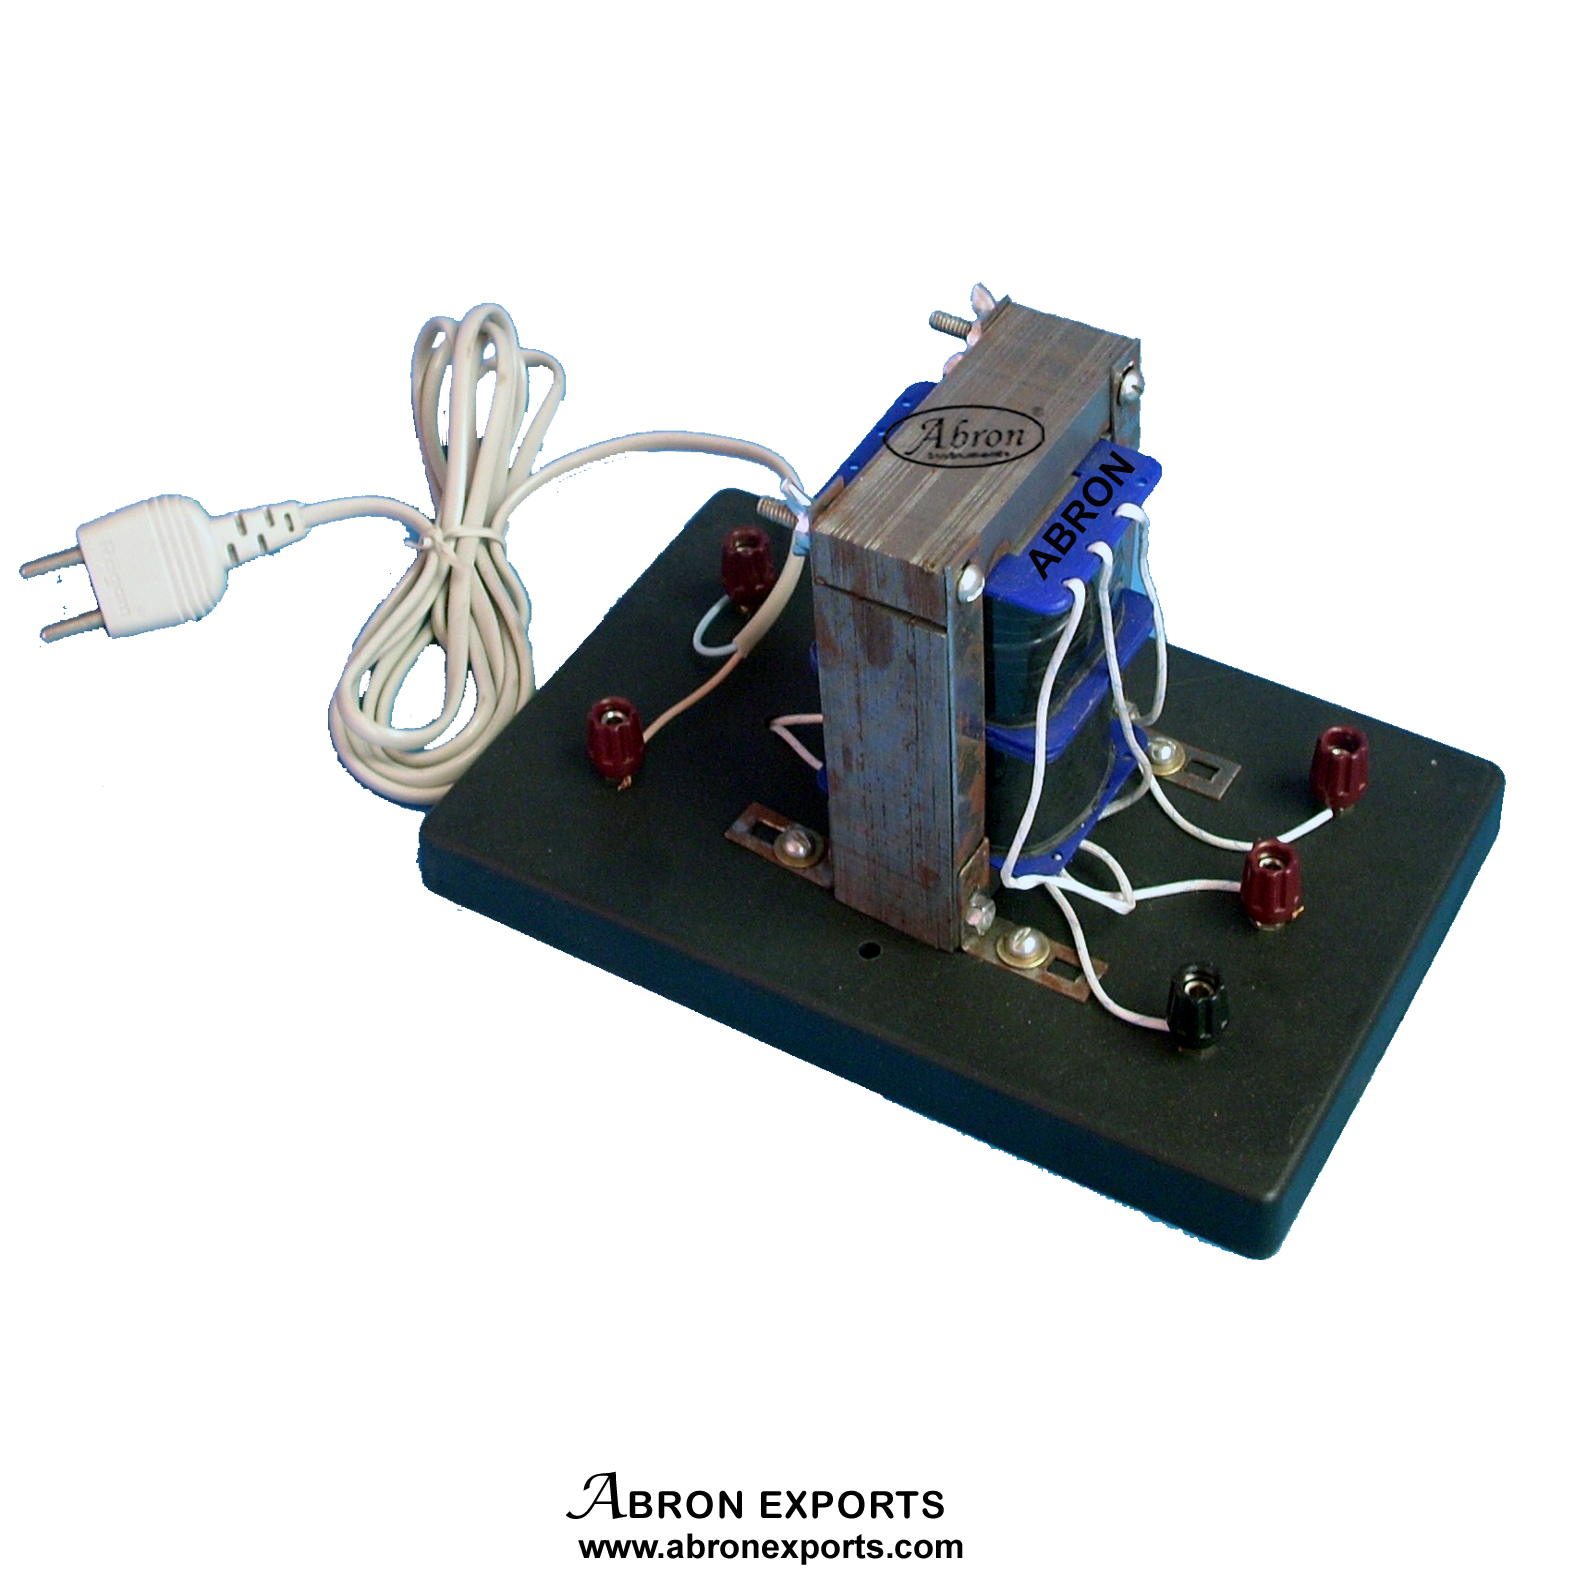 Demonstration step down transformer on base abron electronic etb trainer with power supply-w ae-1229B